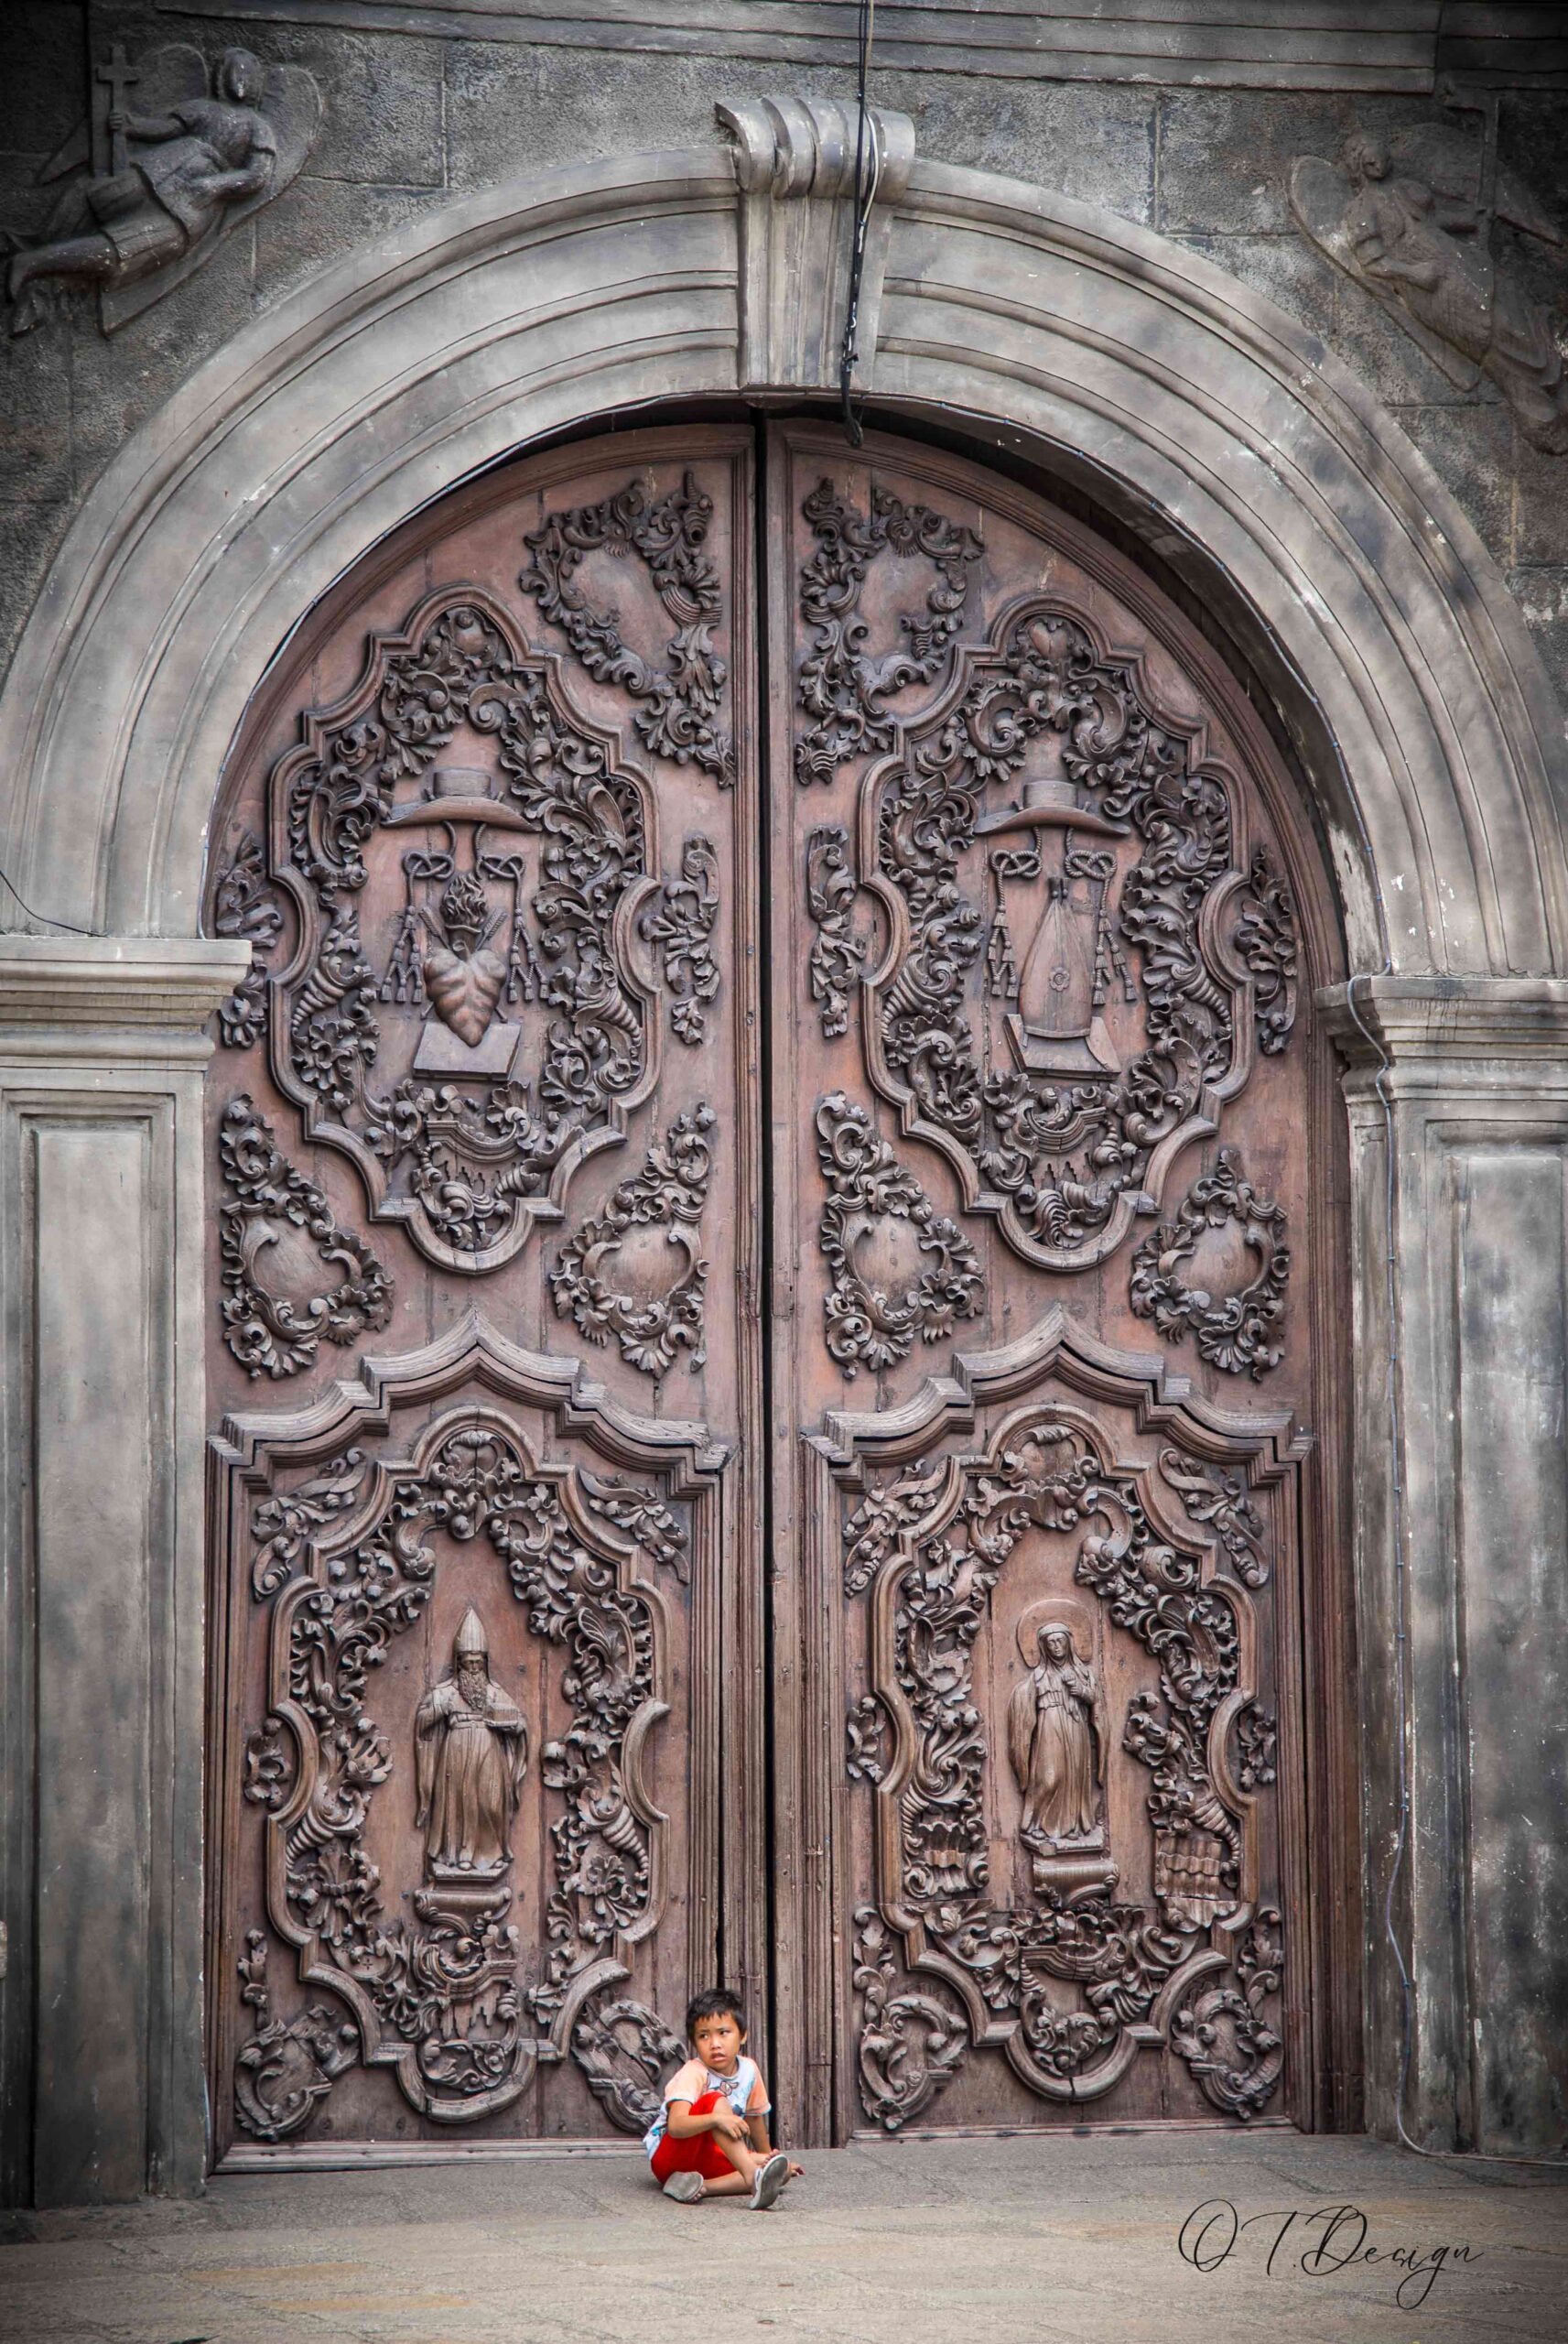 A very small kid in front of a majestic door in Manila, Philippines